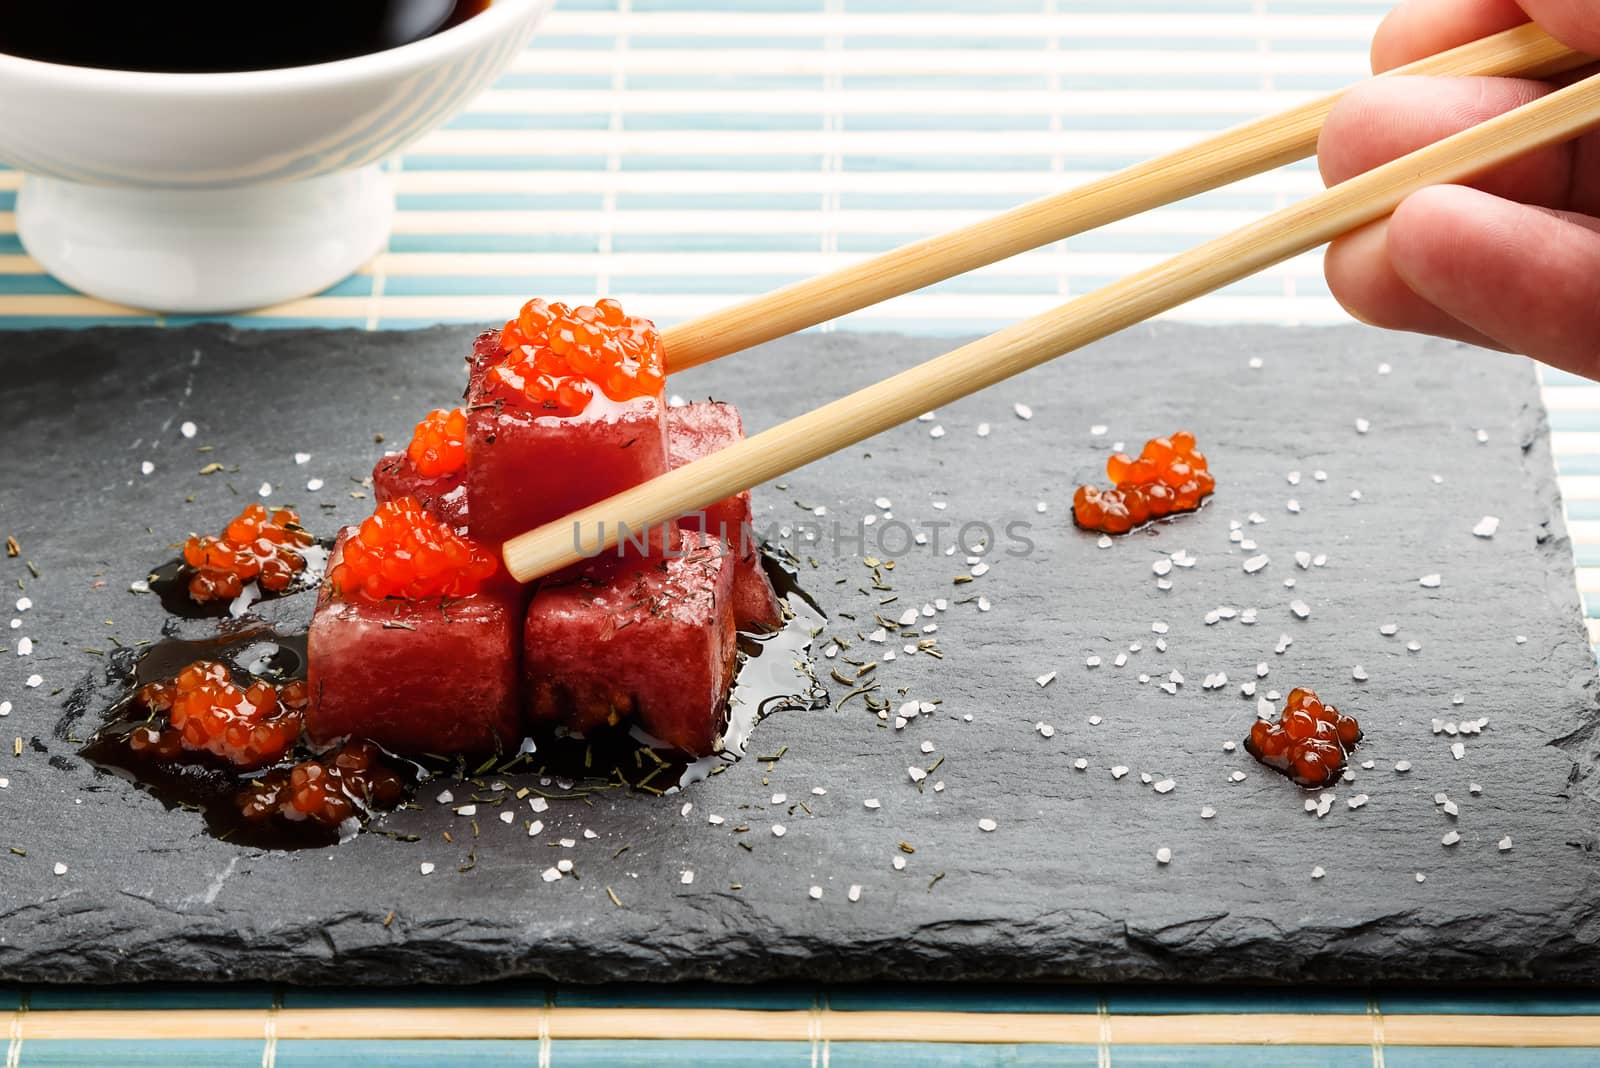 Tuna sashimi dipped in soy sauce with salmon roe, thick salt and dill on slate stone with chopsticks and bowl with soy. Raw fish in traditional Japanese style. Horizontal image.